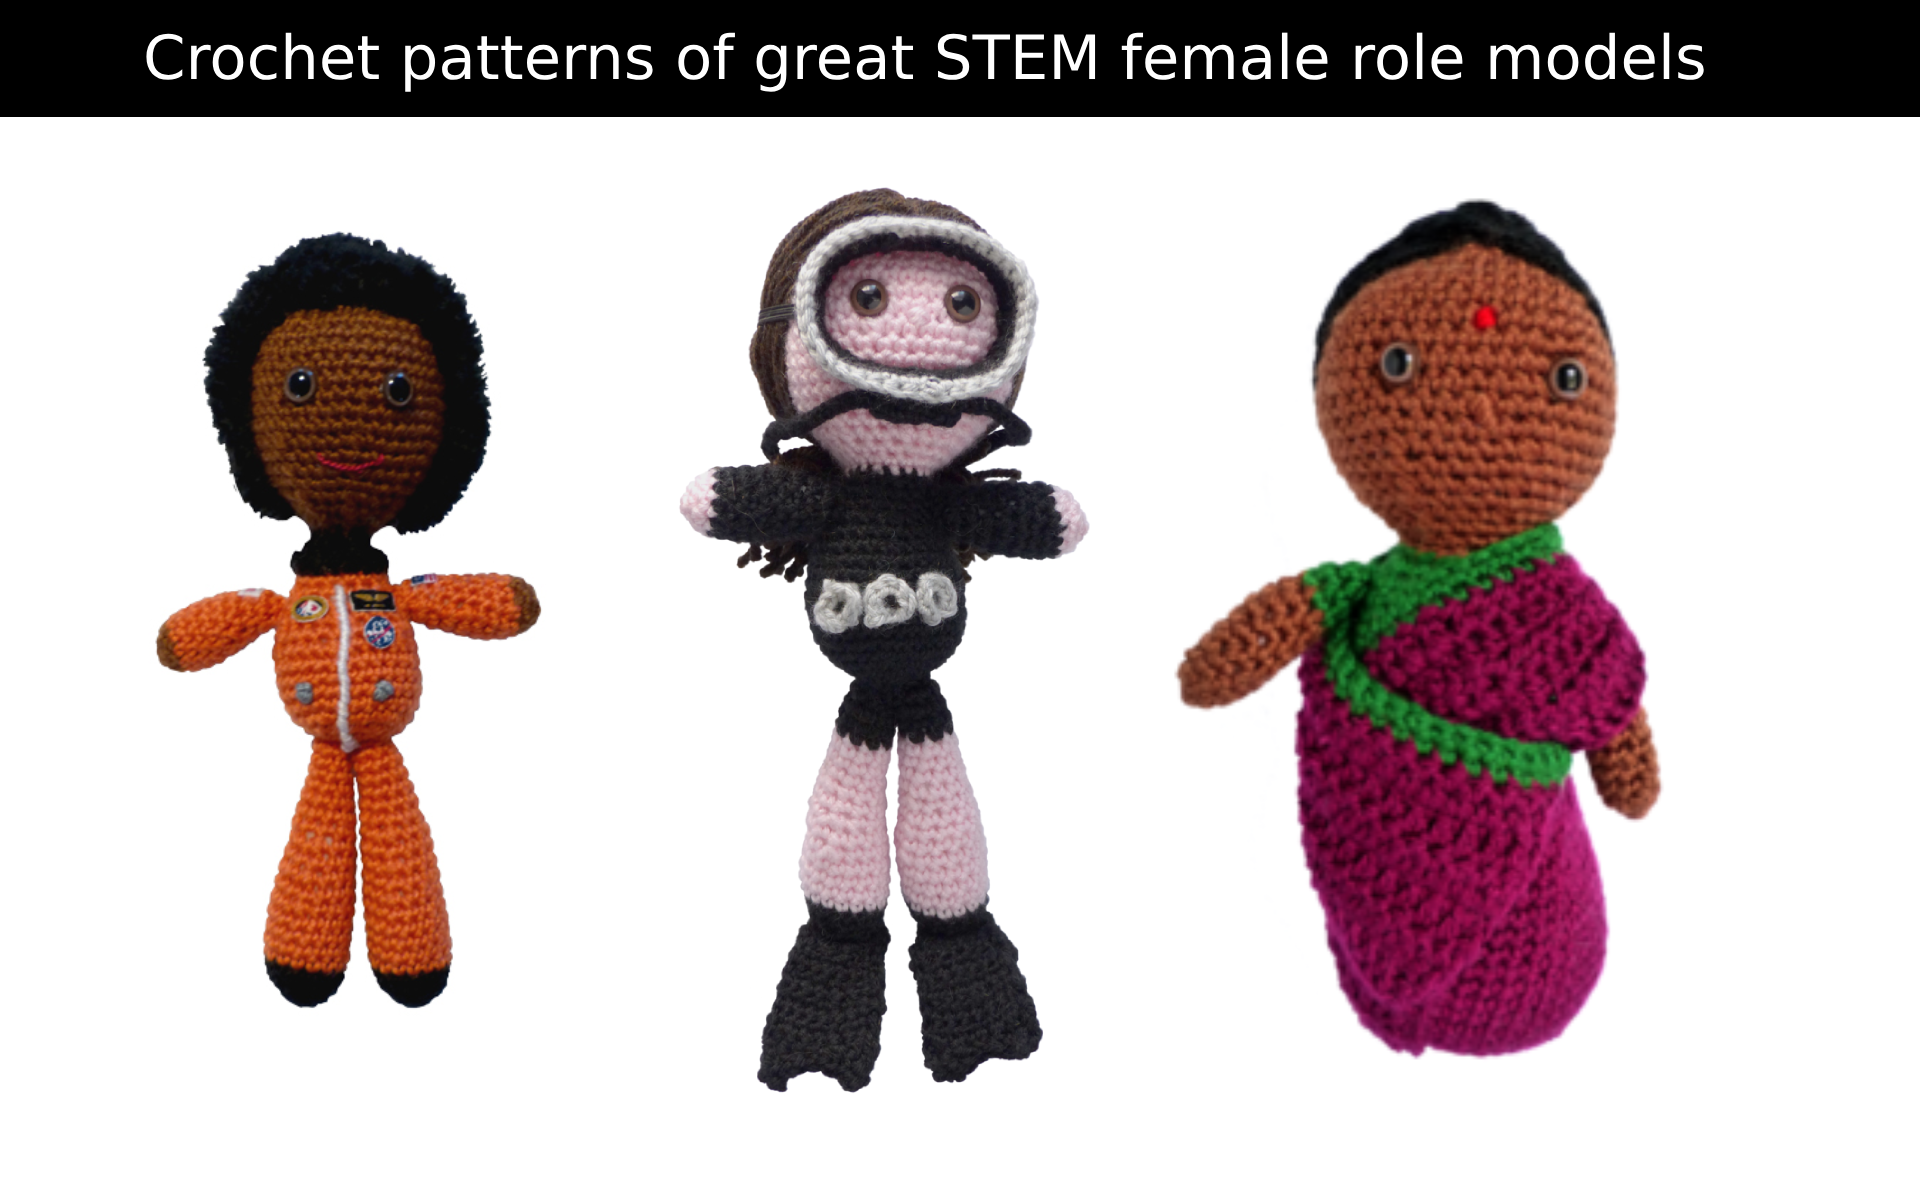 Crochet patterns of great STEM female role models, aims to introduce girls to STEM role models early to help them understand that they can have a career in STEM